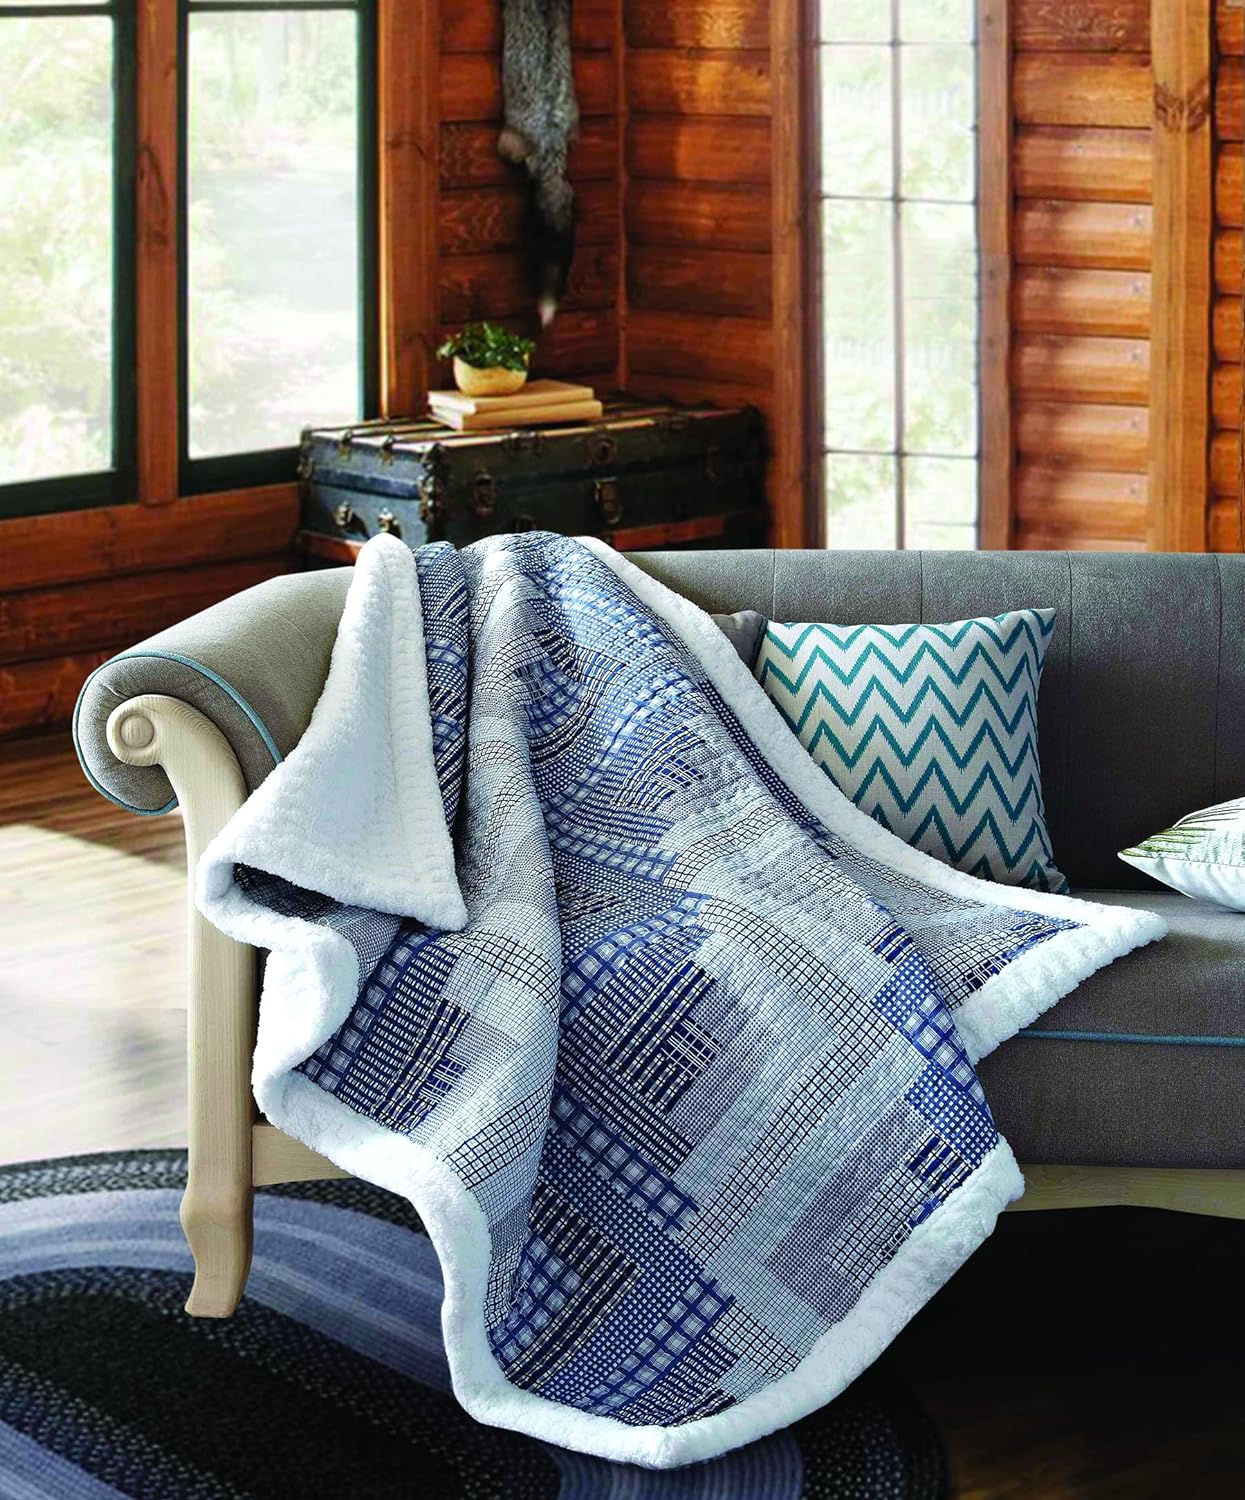 Virah Bella Quilted Sherpa Throw Blanket 50" x 60" Montana Cabin: Blue/Gray Lightweight Throw Quilt Great for Loungers & Extra Bedding - Beautiful Lodge-Themed Blanket